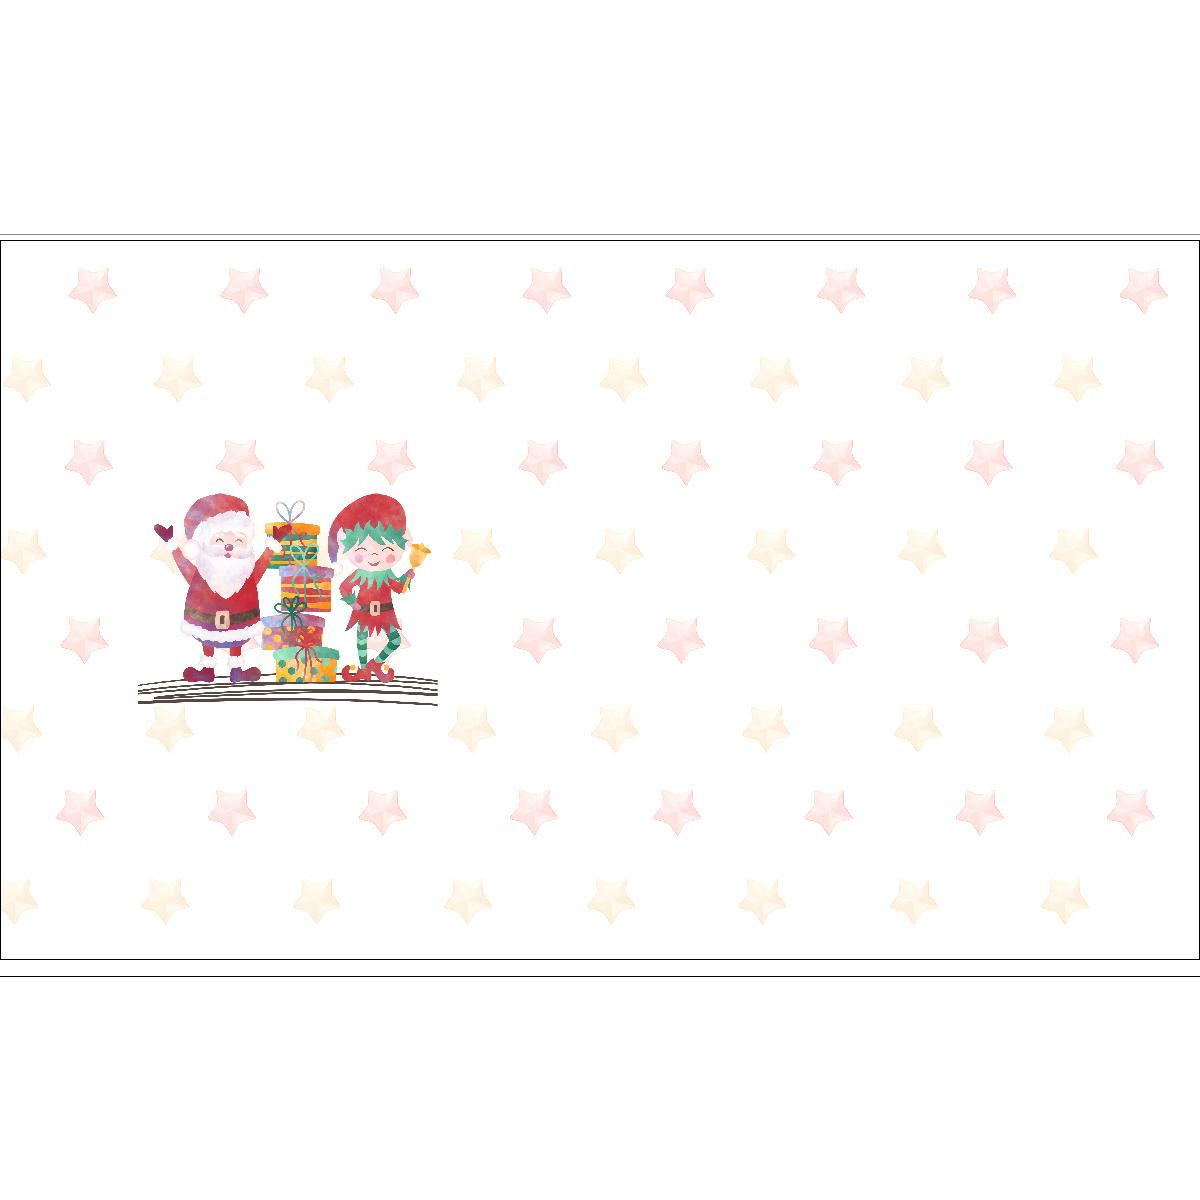 SANTA CLAUS AND ELF / presents (CHRISTMAS FRIENDS) - Cotton woven fabric panel ( 45 x 75 cm )